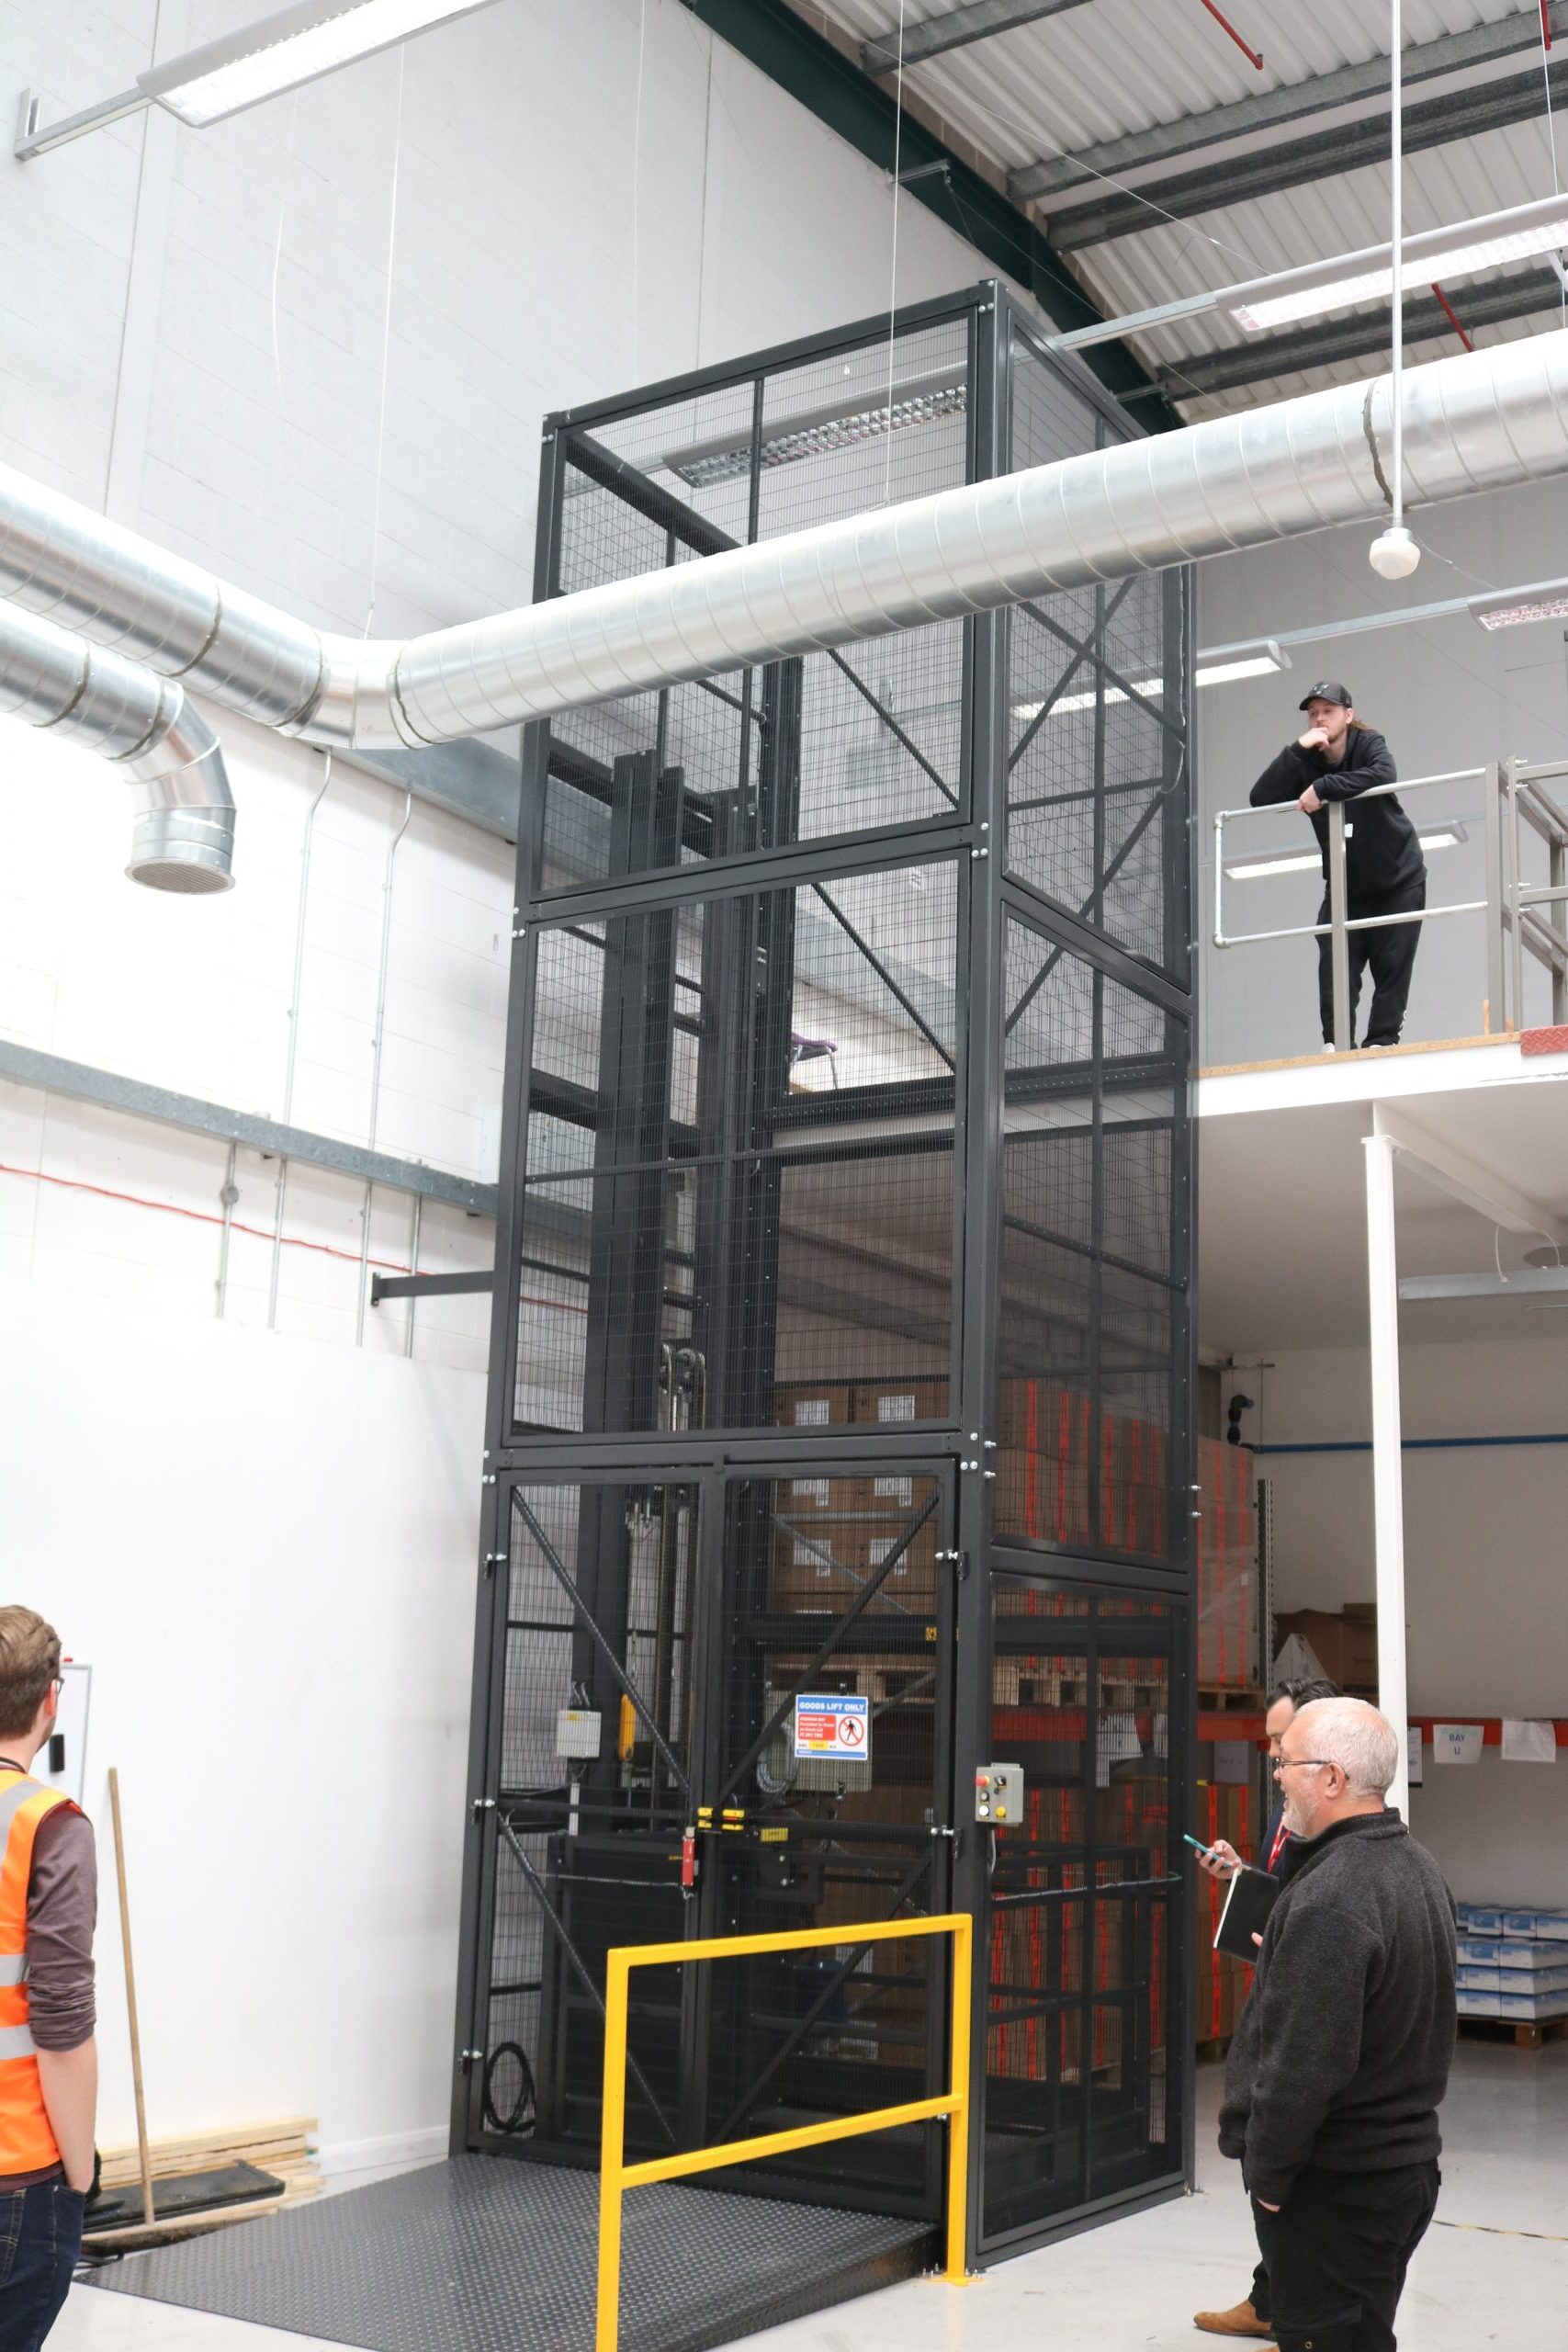 Industrial And Warehouse Lifts Advanced Handling Ltd